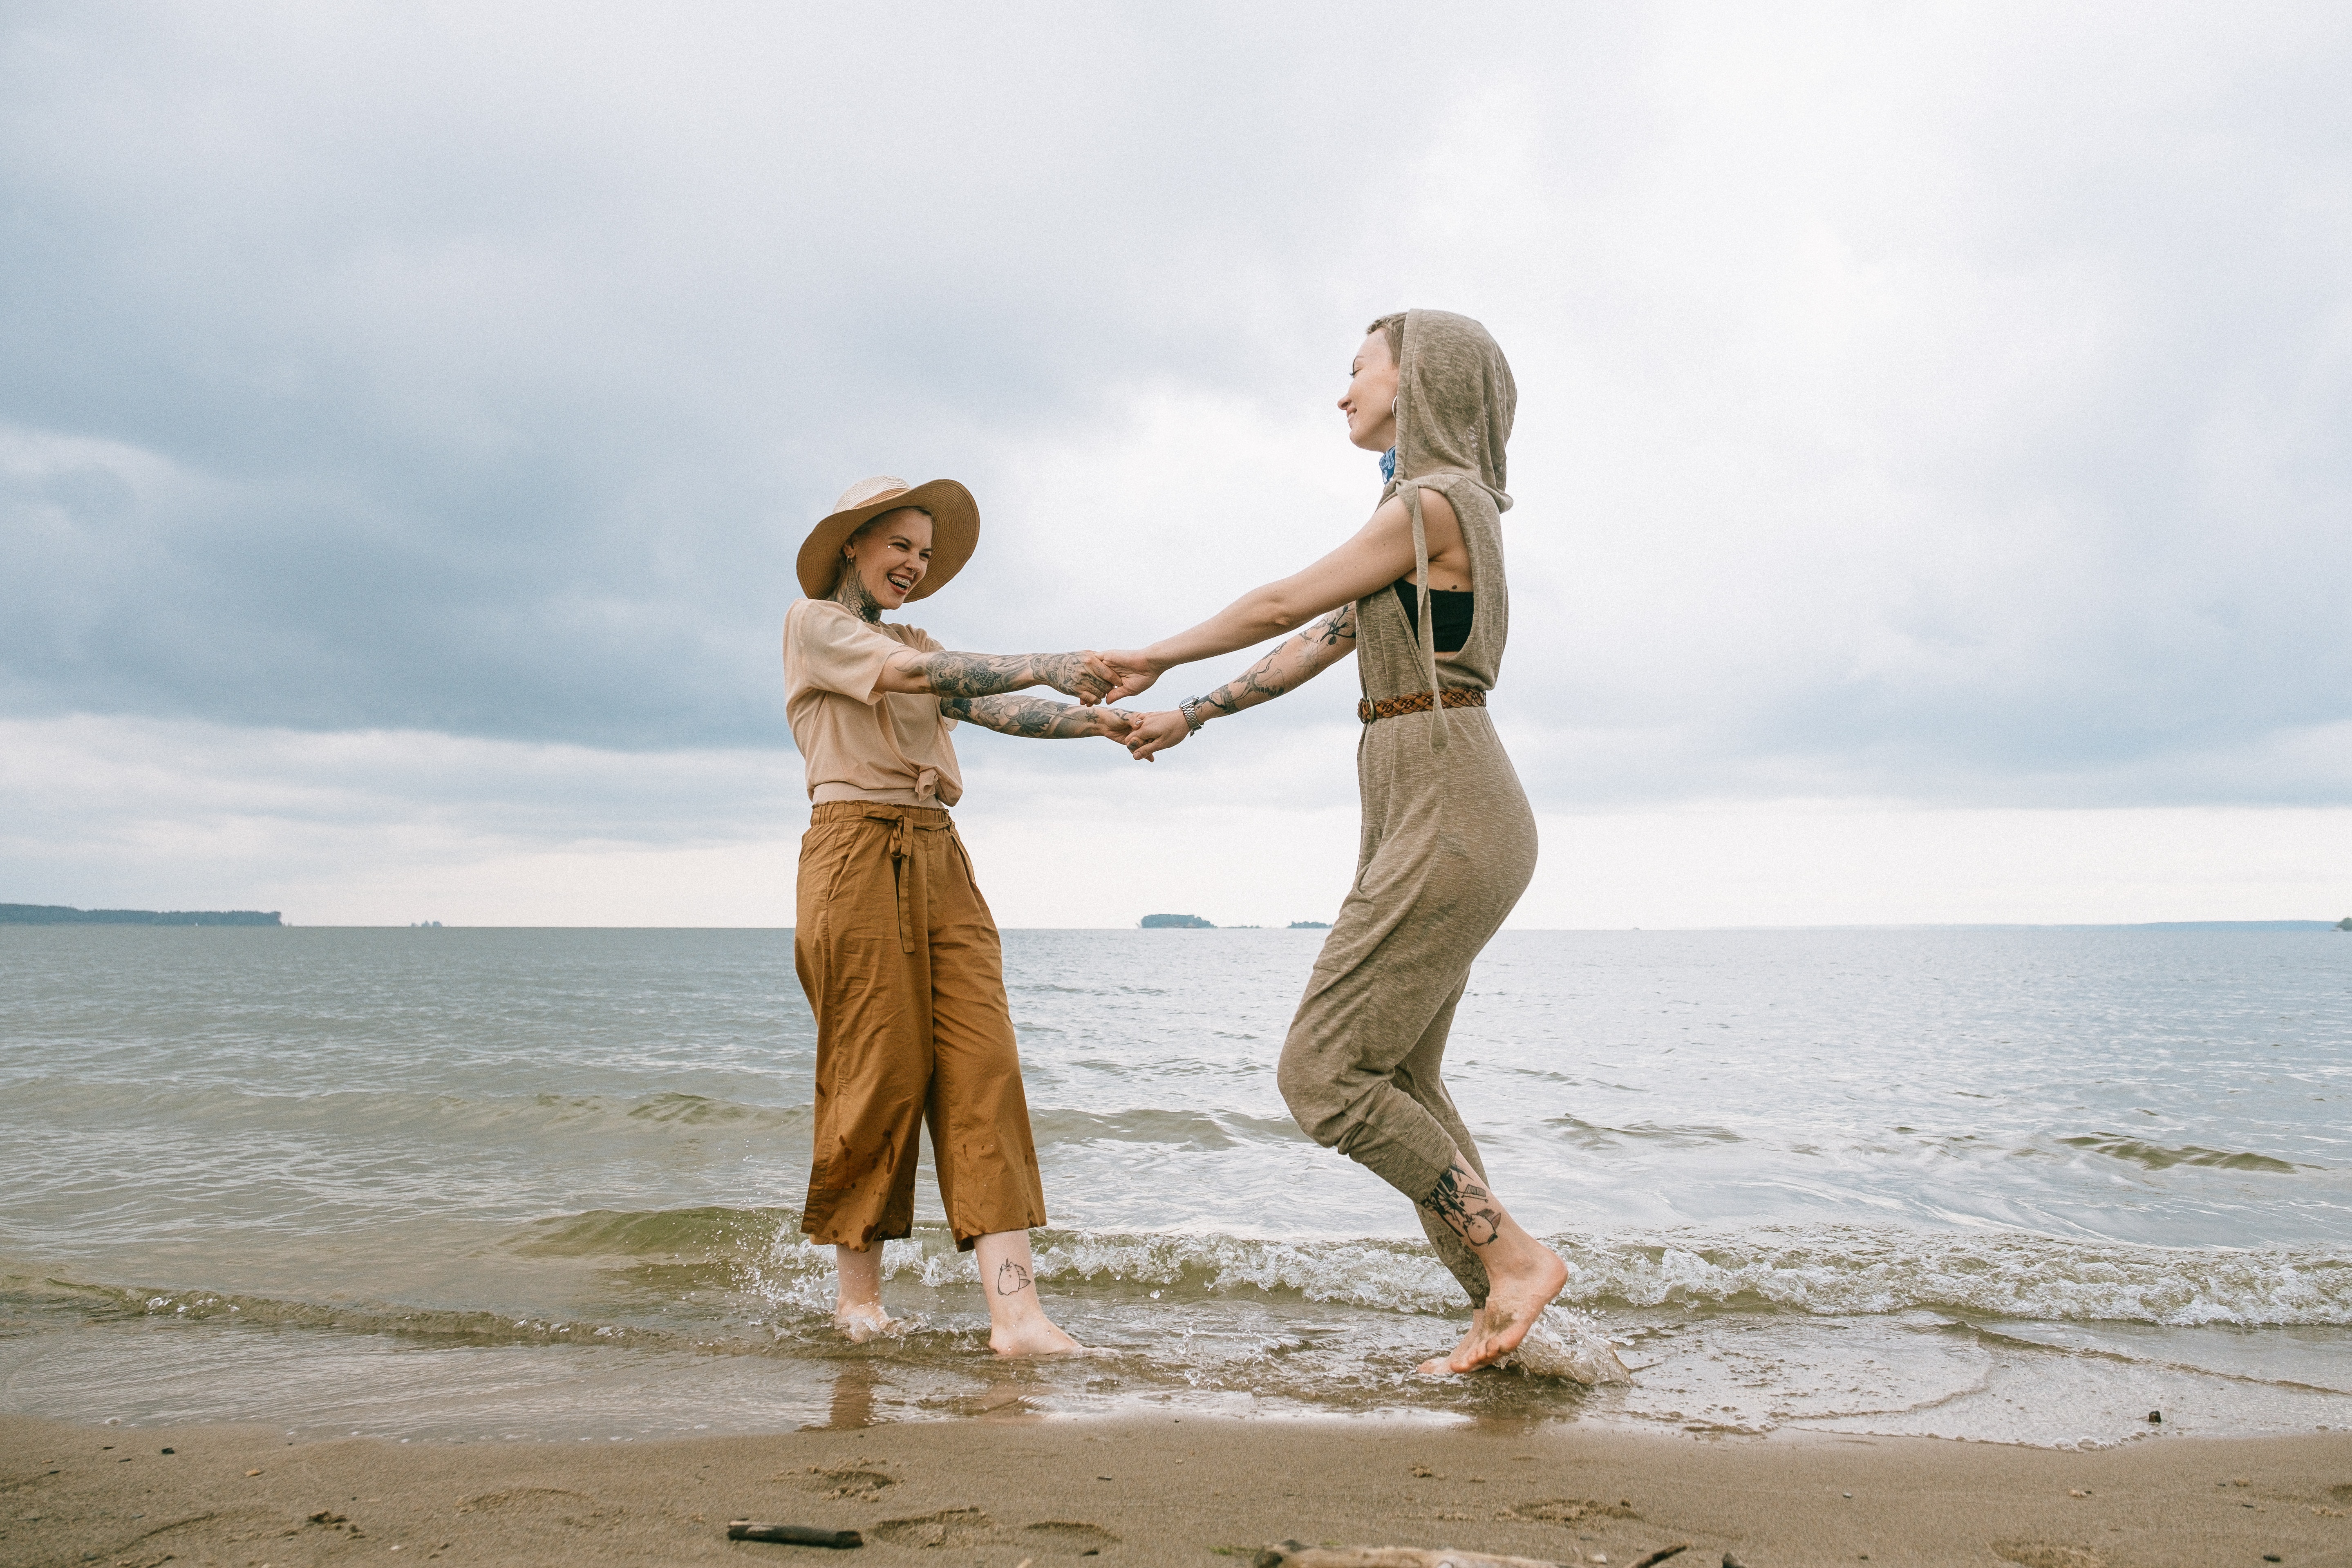 Two women dancing on the beach. | Source: Pexels